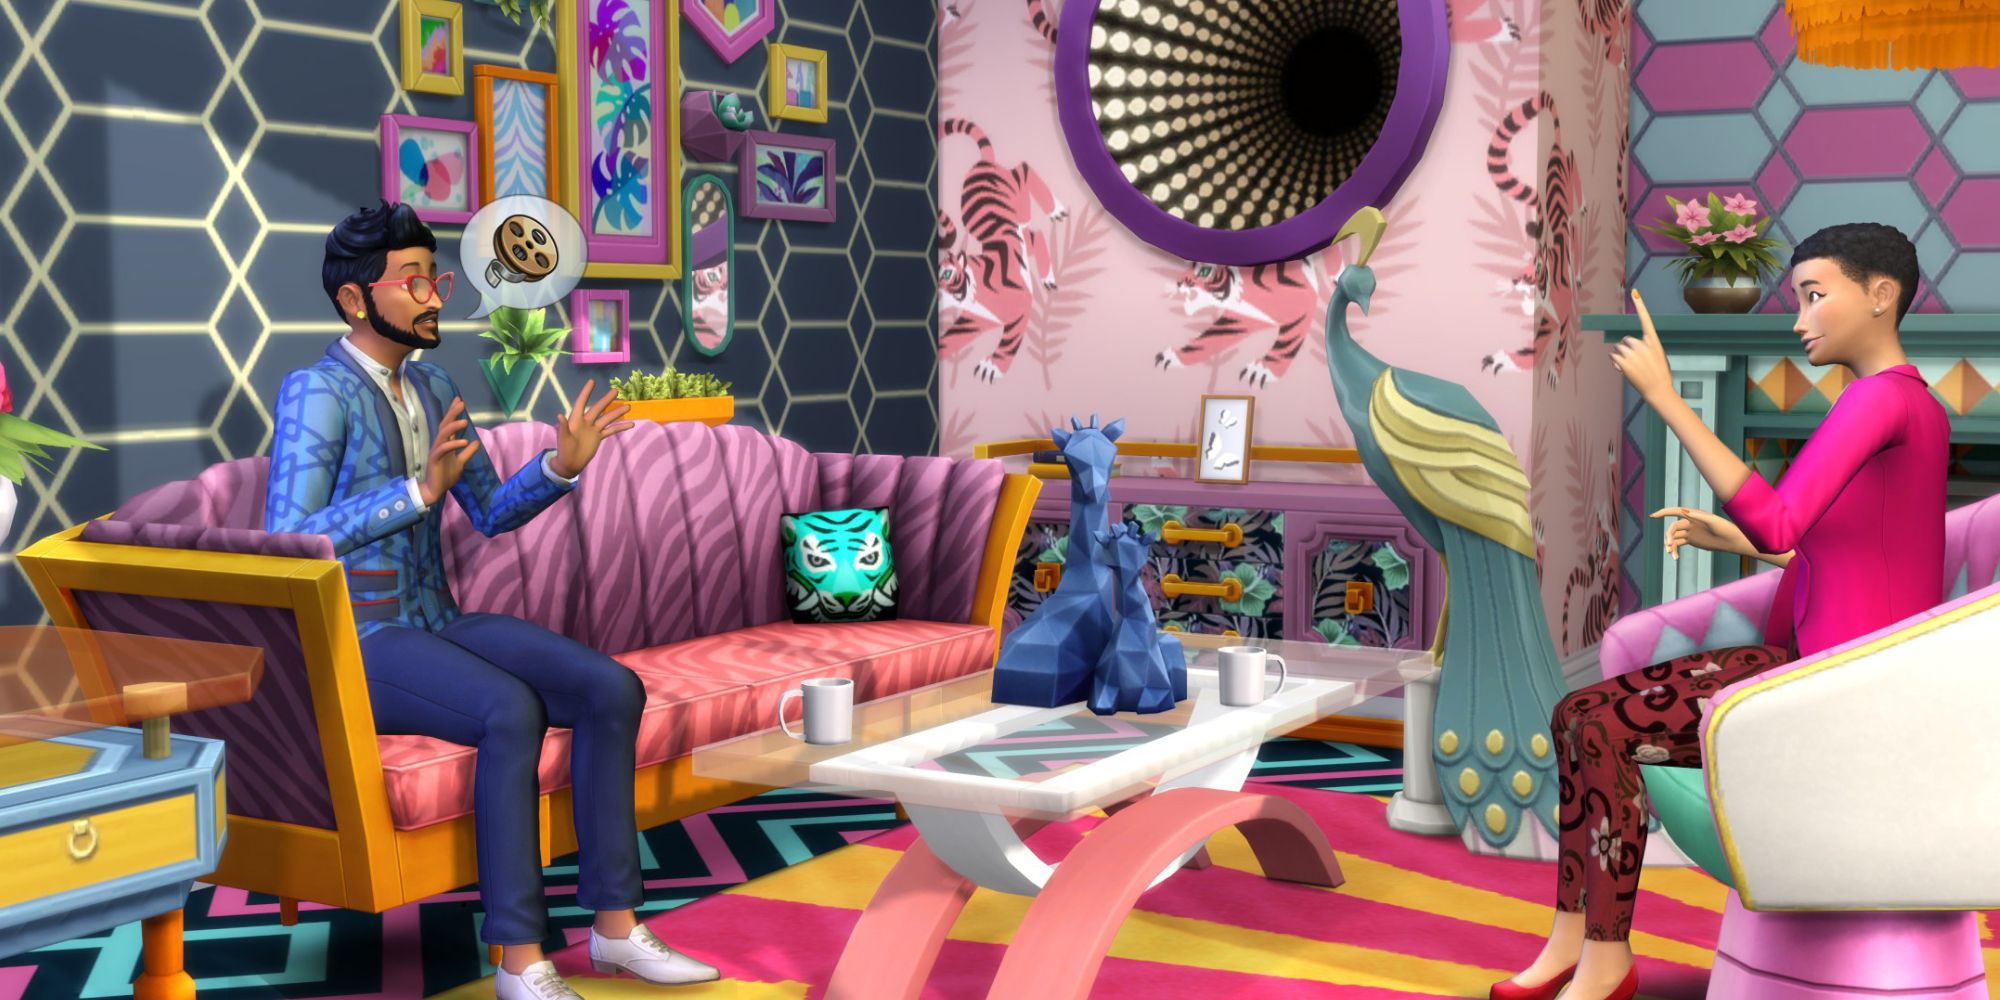 Sims 4 Decor To The Max bright lounge room with 2 sims chatting.